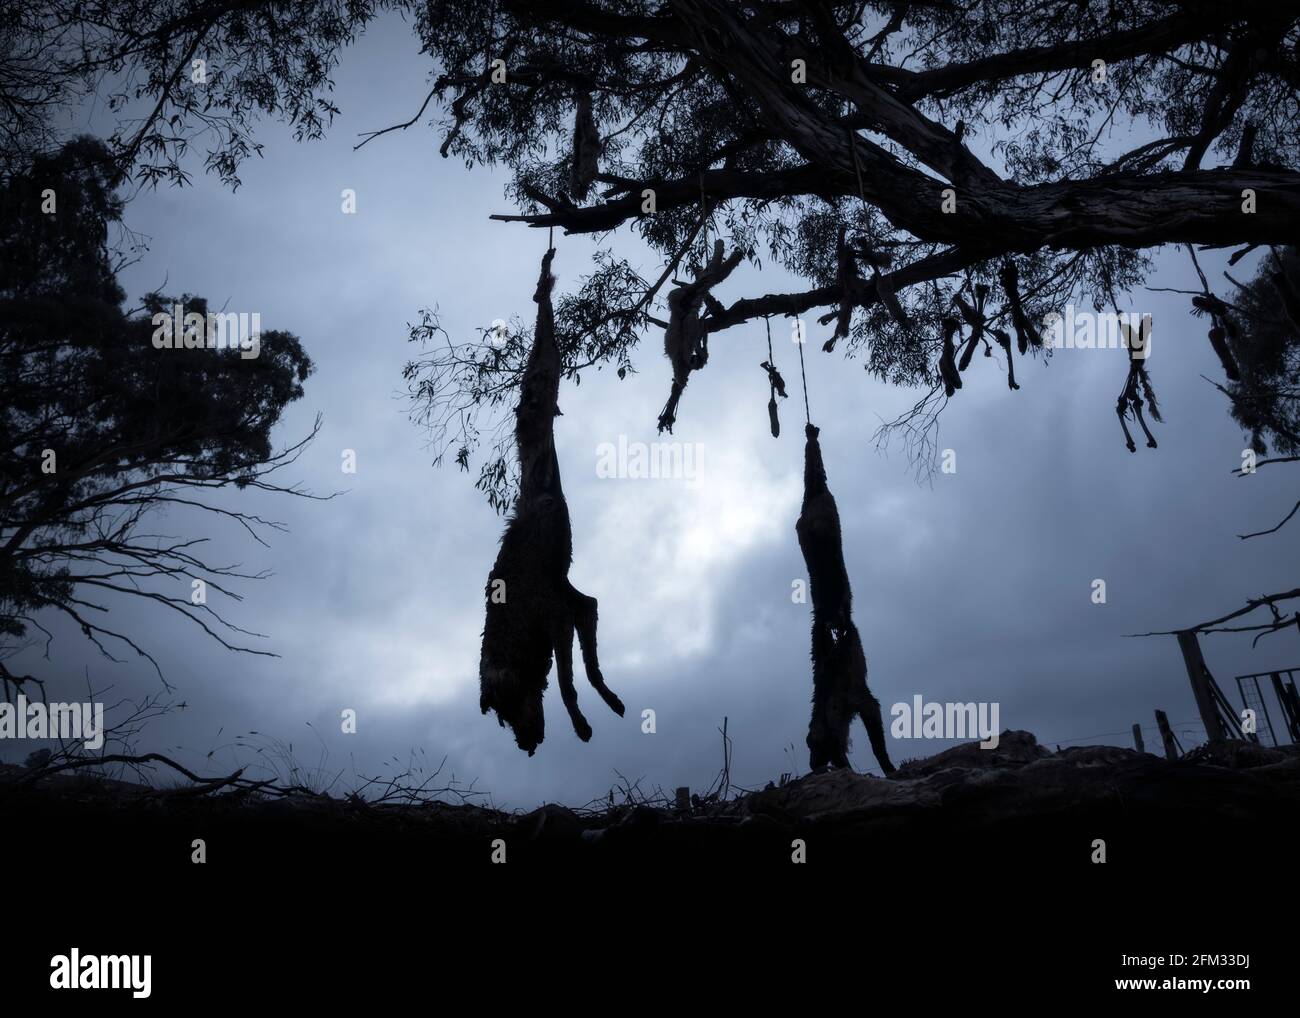 Silhouette of dead, wild dingos hanging from tree in the bush, Australia Stock Photo